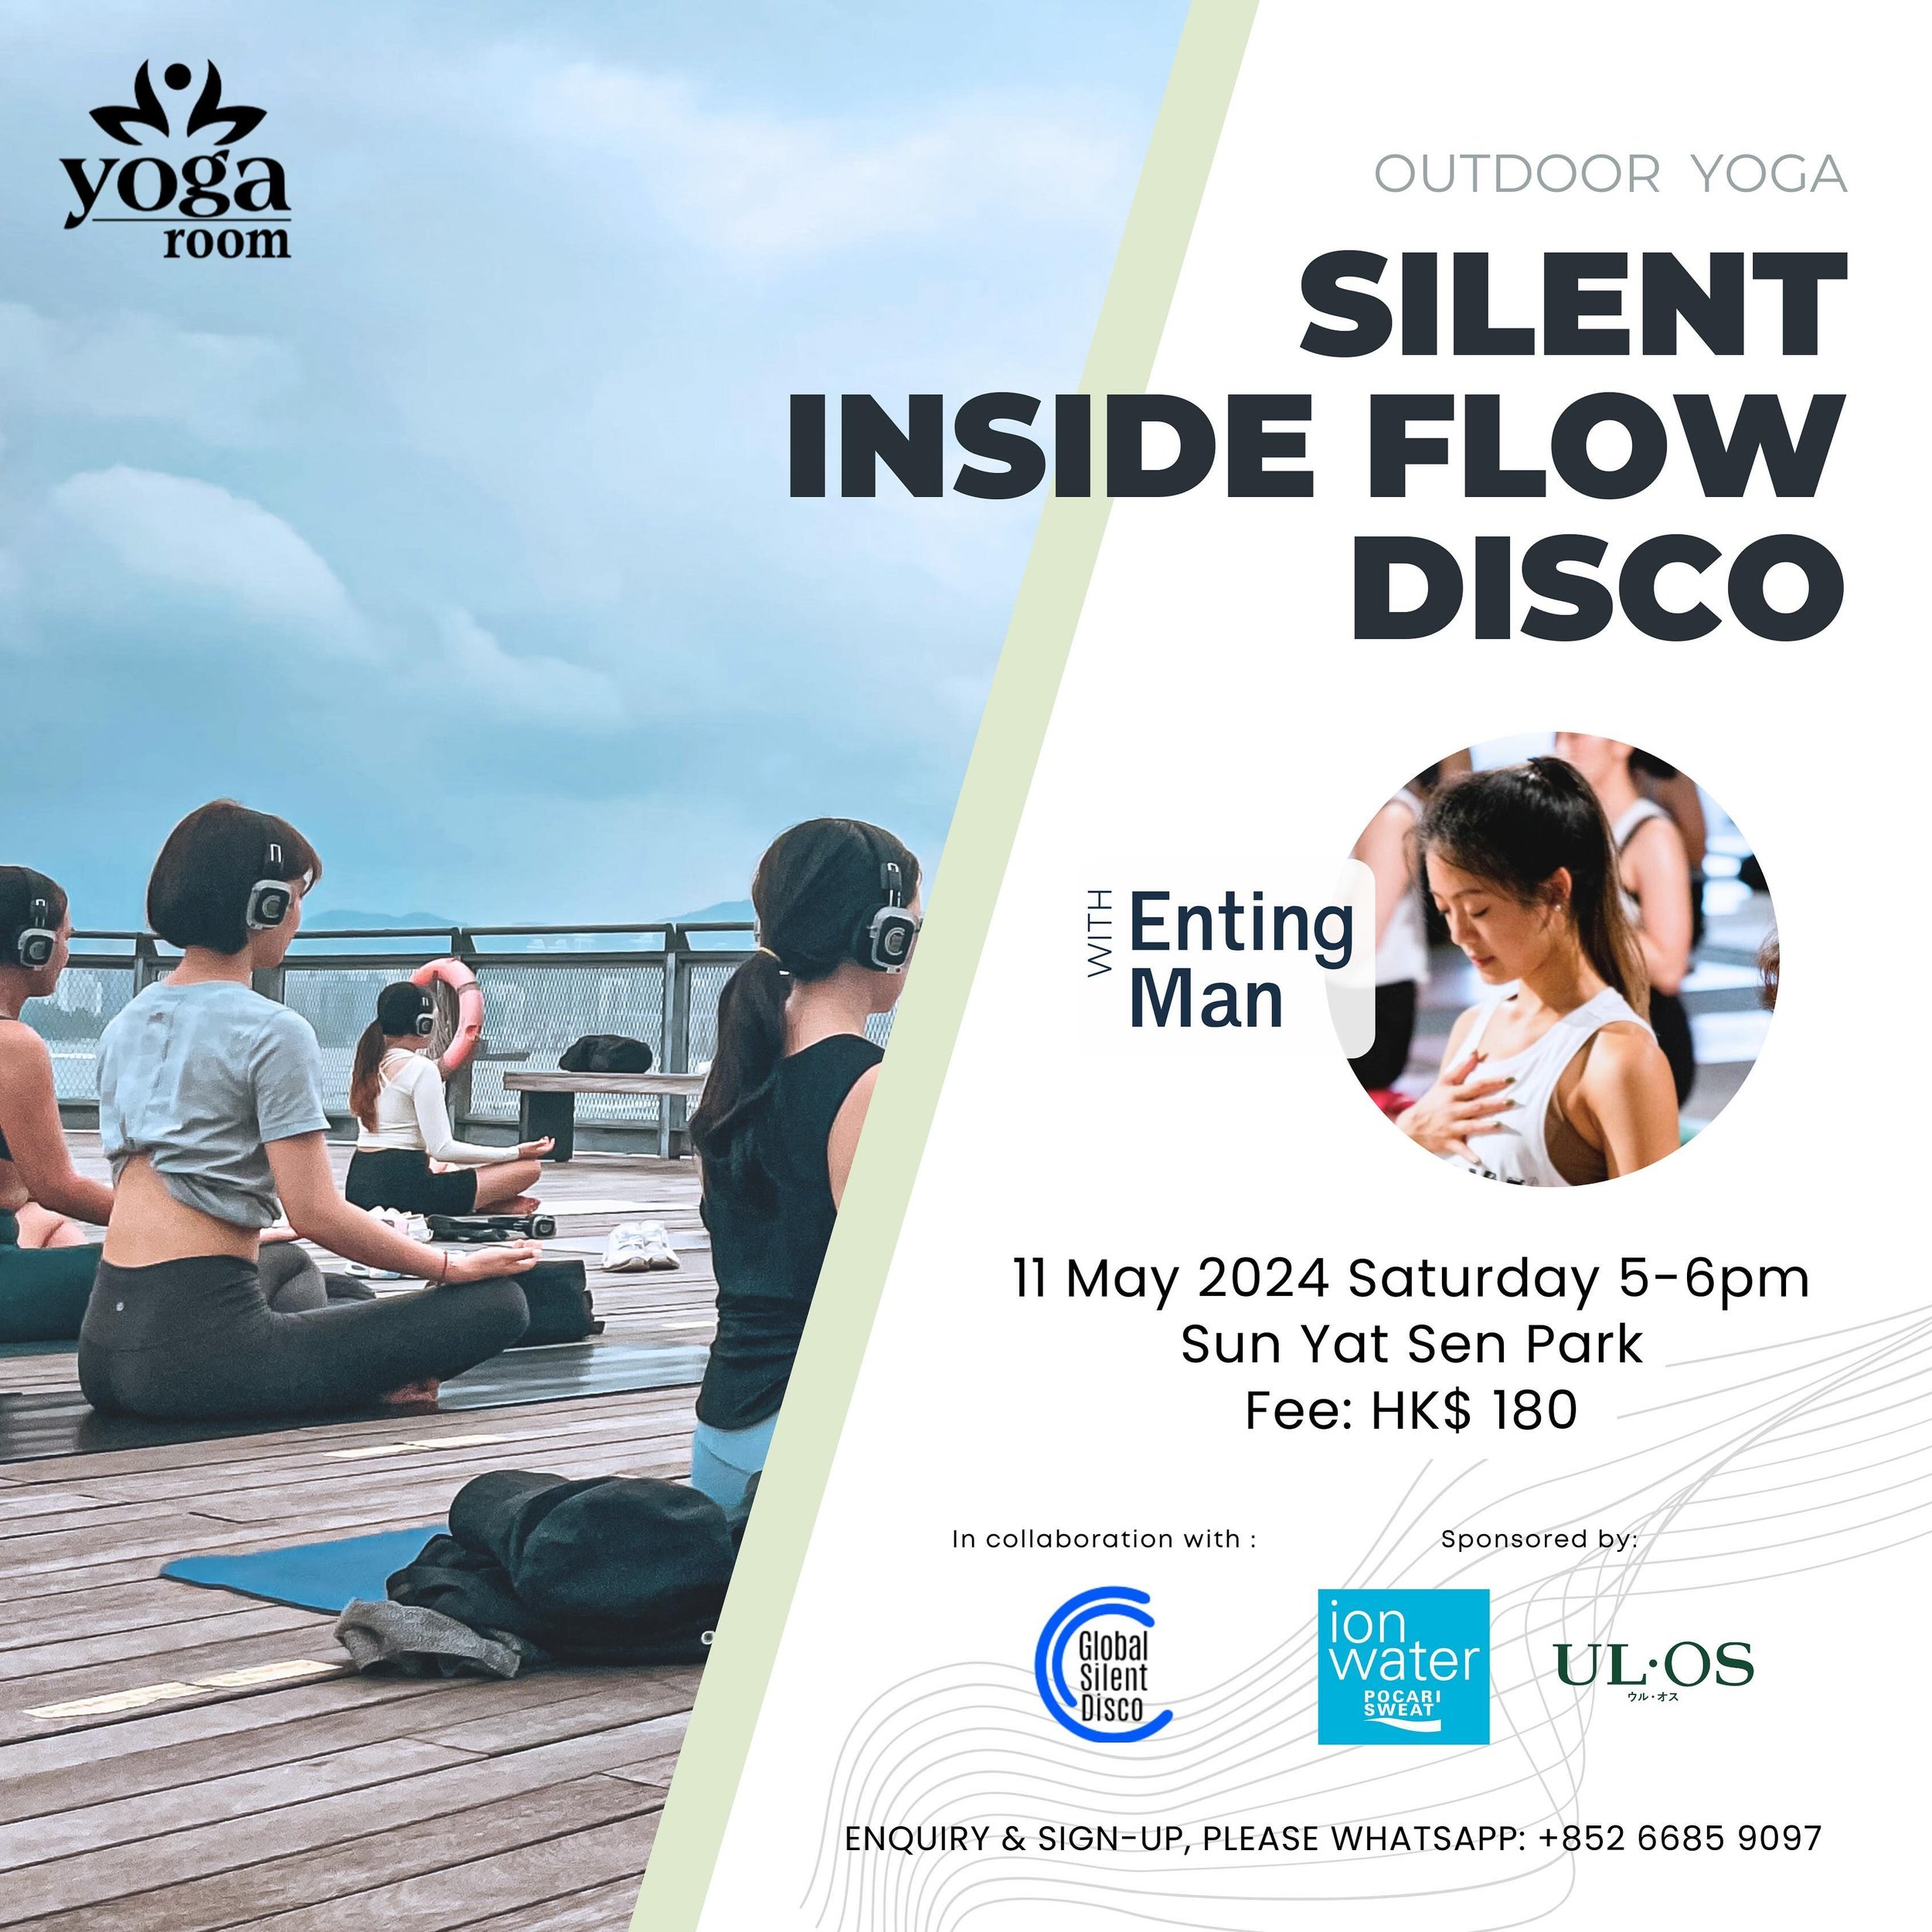 Silent Inside Flow Disco on the Hong Kong Waterfront 🎧🎶🌊 Brought to you in collaboration with Global Silent Disco, @pocarisweathk &amp; @ulos.hk 

⚪️ Date: 11 May 2024 (Saturday)
⚪️ Time: 5-6pm
⚪️ Venue: In front of the green area at waterfront si